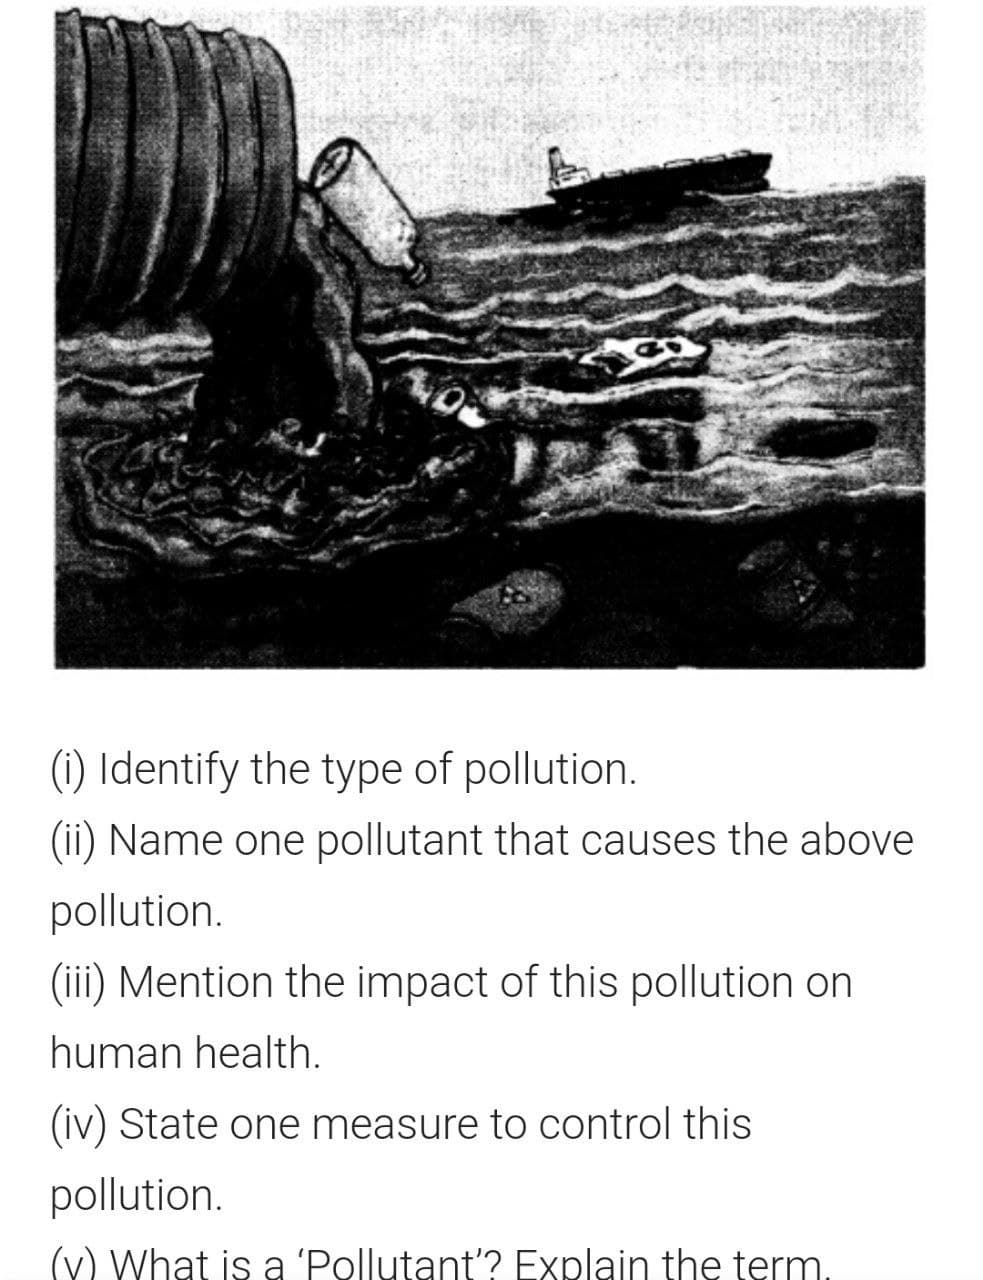 (1) Identify the type of pollution.
(ii) Name one pollutant that causes the above
pollution.
(iii) Mention the impact of this pollution on
human health.
(iv) State one measure to control this
pollution.
(v) What is a 'Pollutant'? Explain the term.
